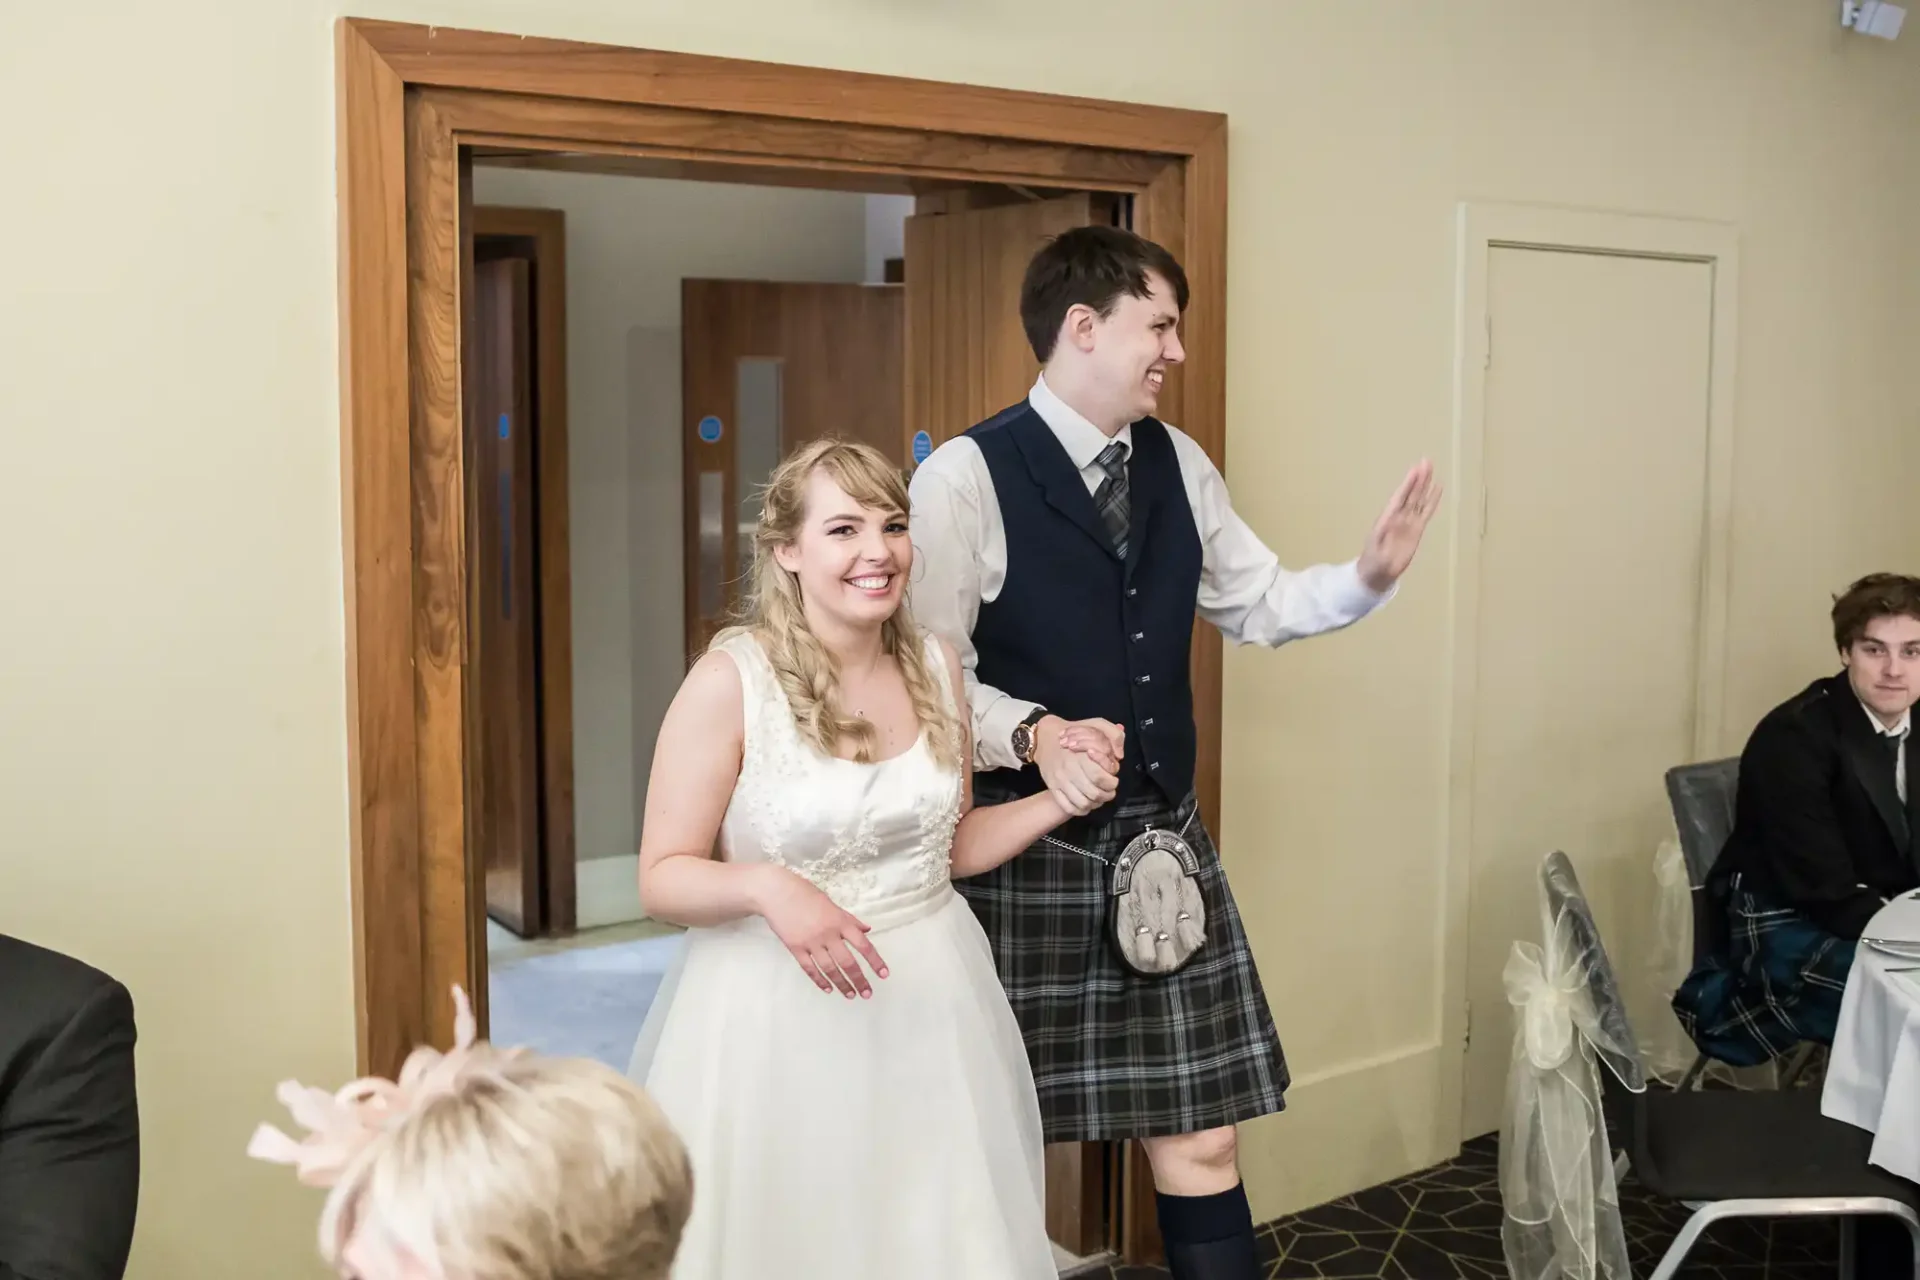 A bride and groom smiling and walking through a doorway, the groom in a kilt and the bride in a white dress.